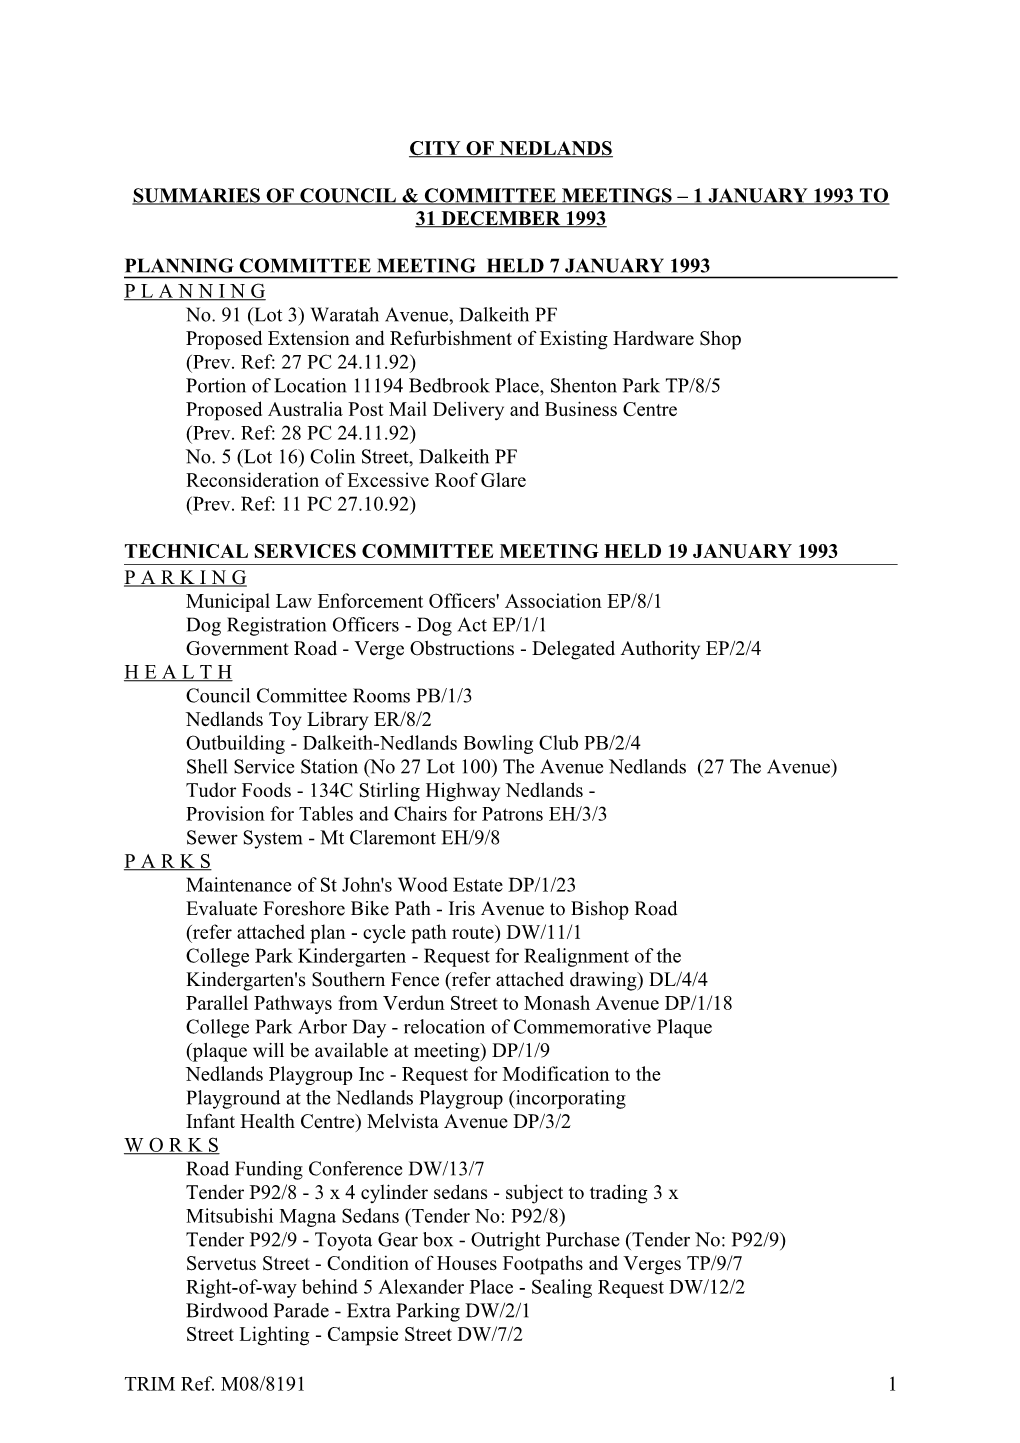 Summaries of Council & Committee Meetings 1 January 1993 to 31 December 1993